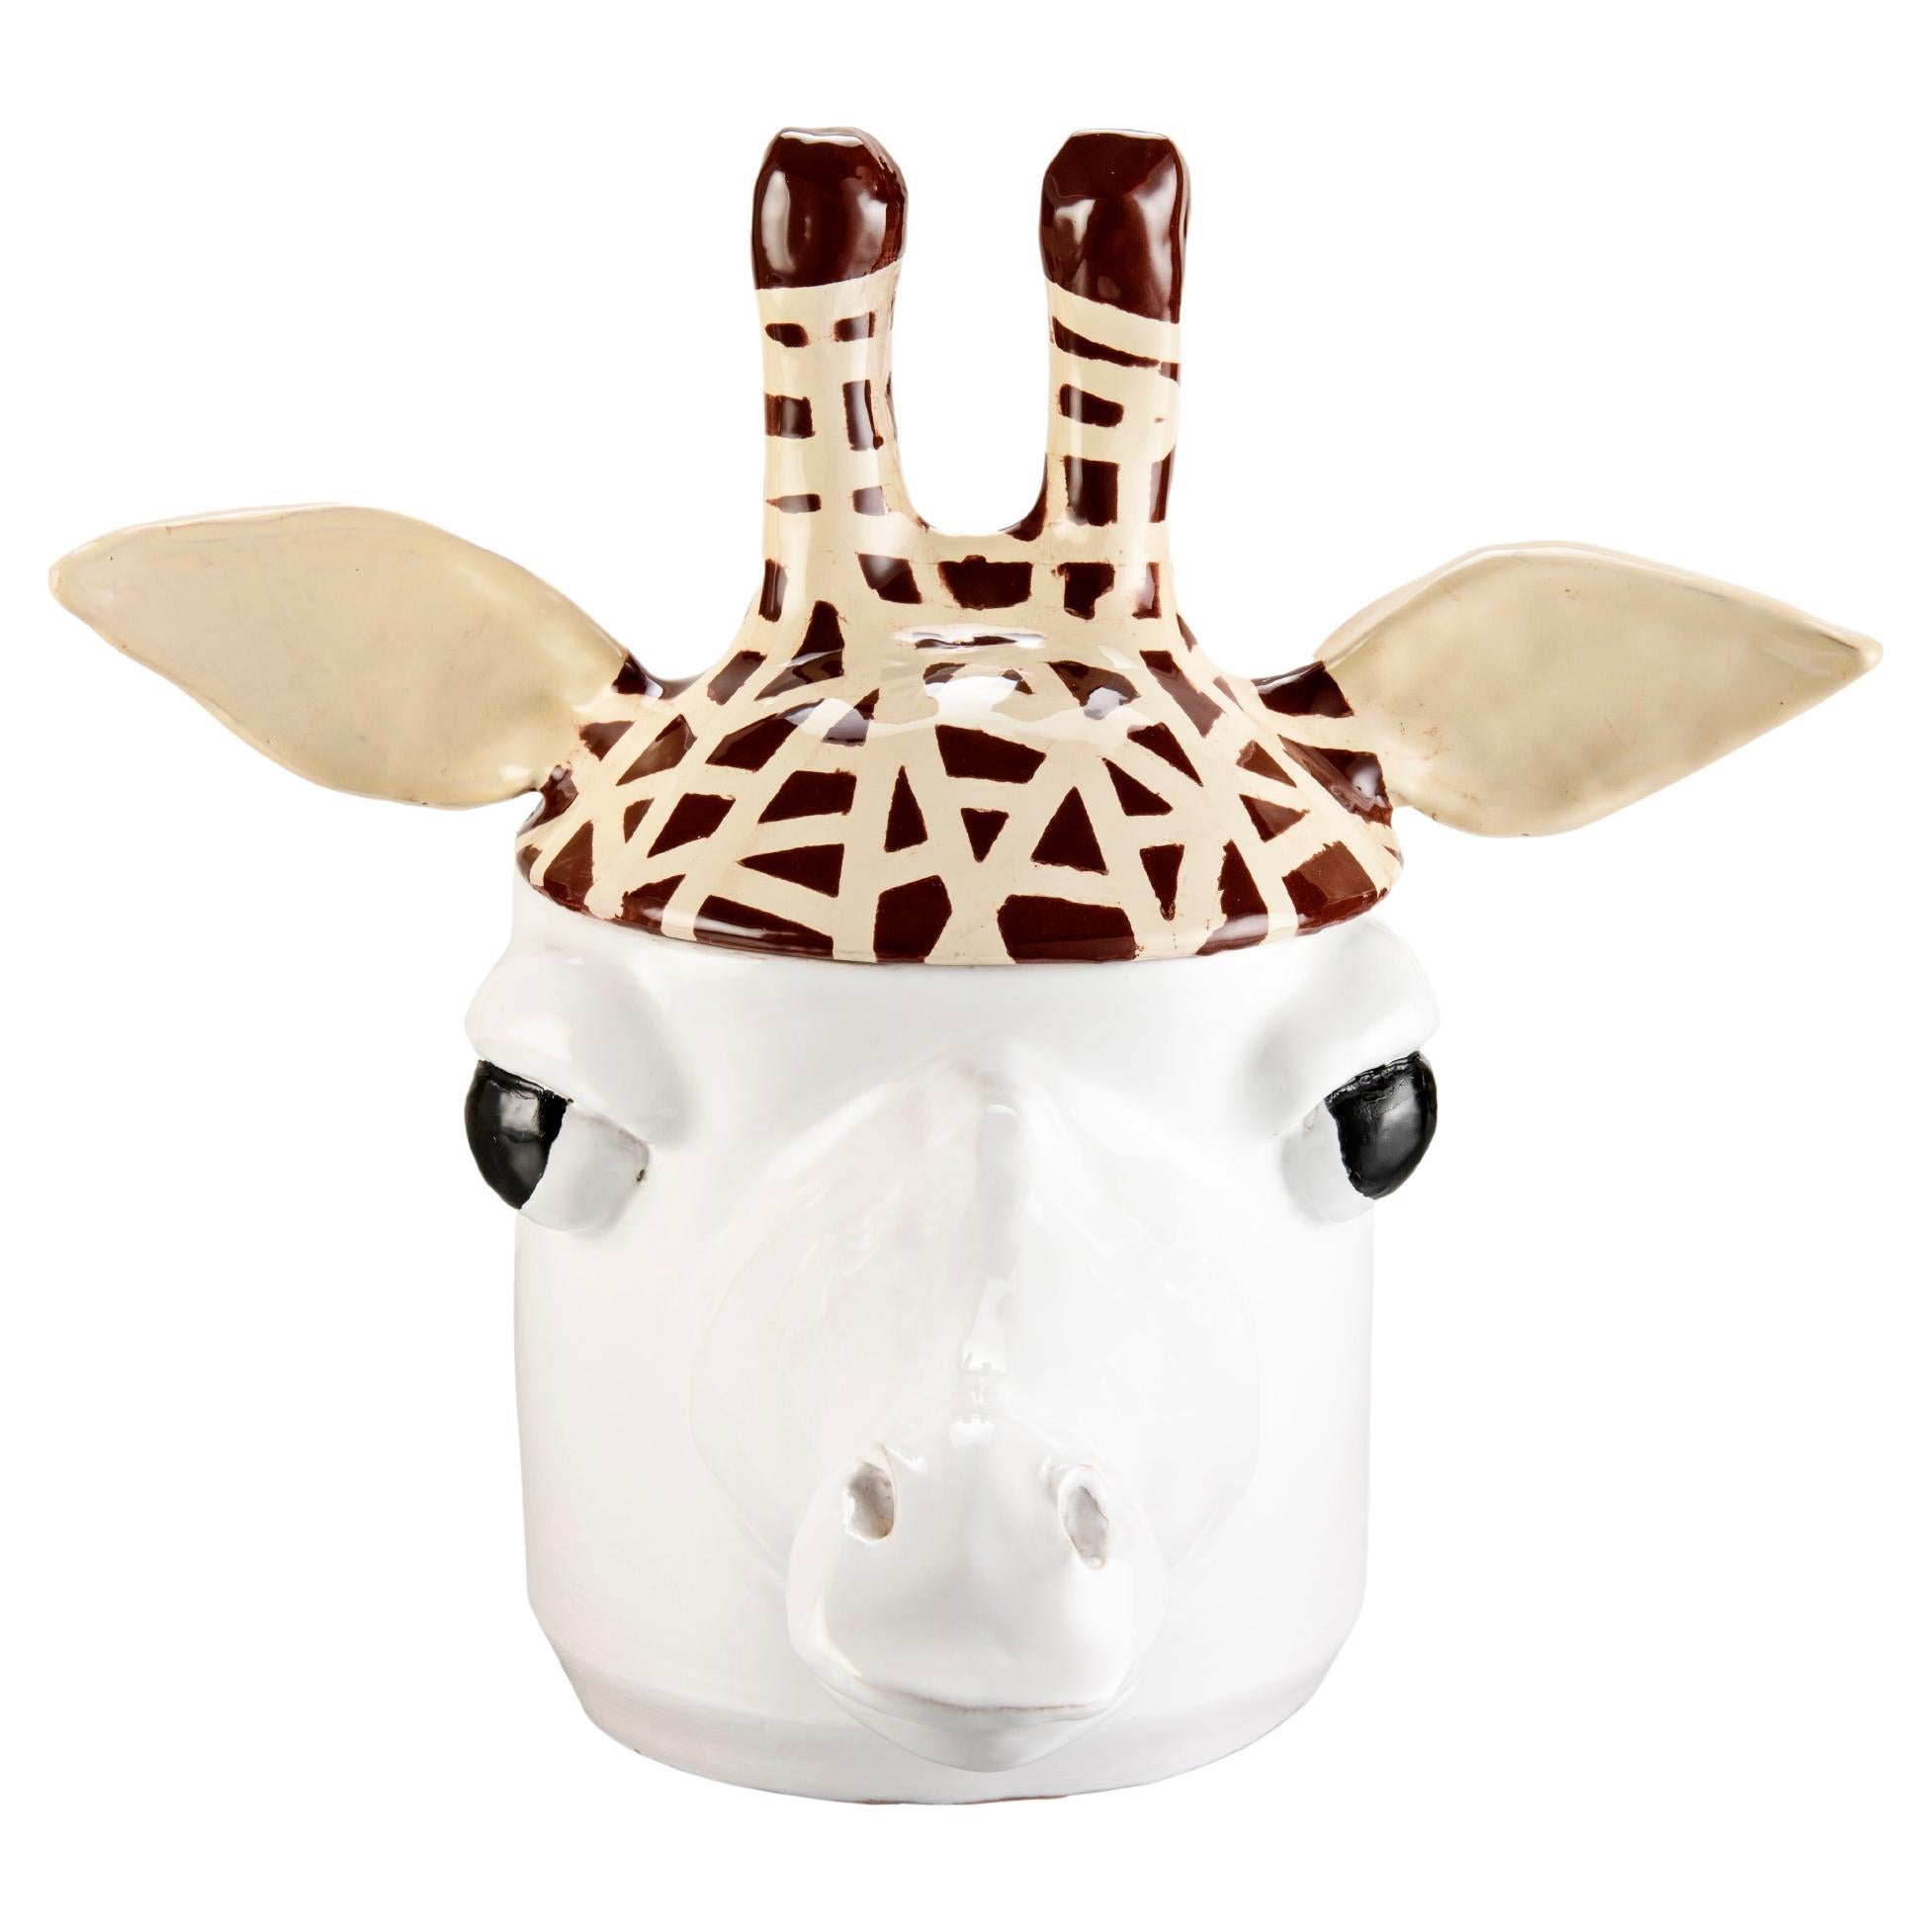 Freaklab Giraffe Conteiner Large Made Entirely by Hand in Ceramic For Sale